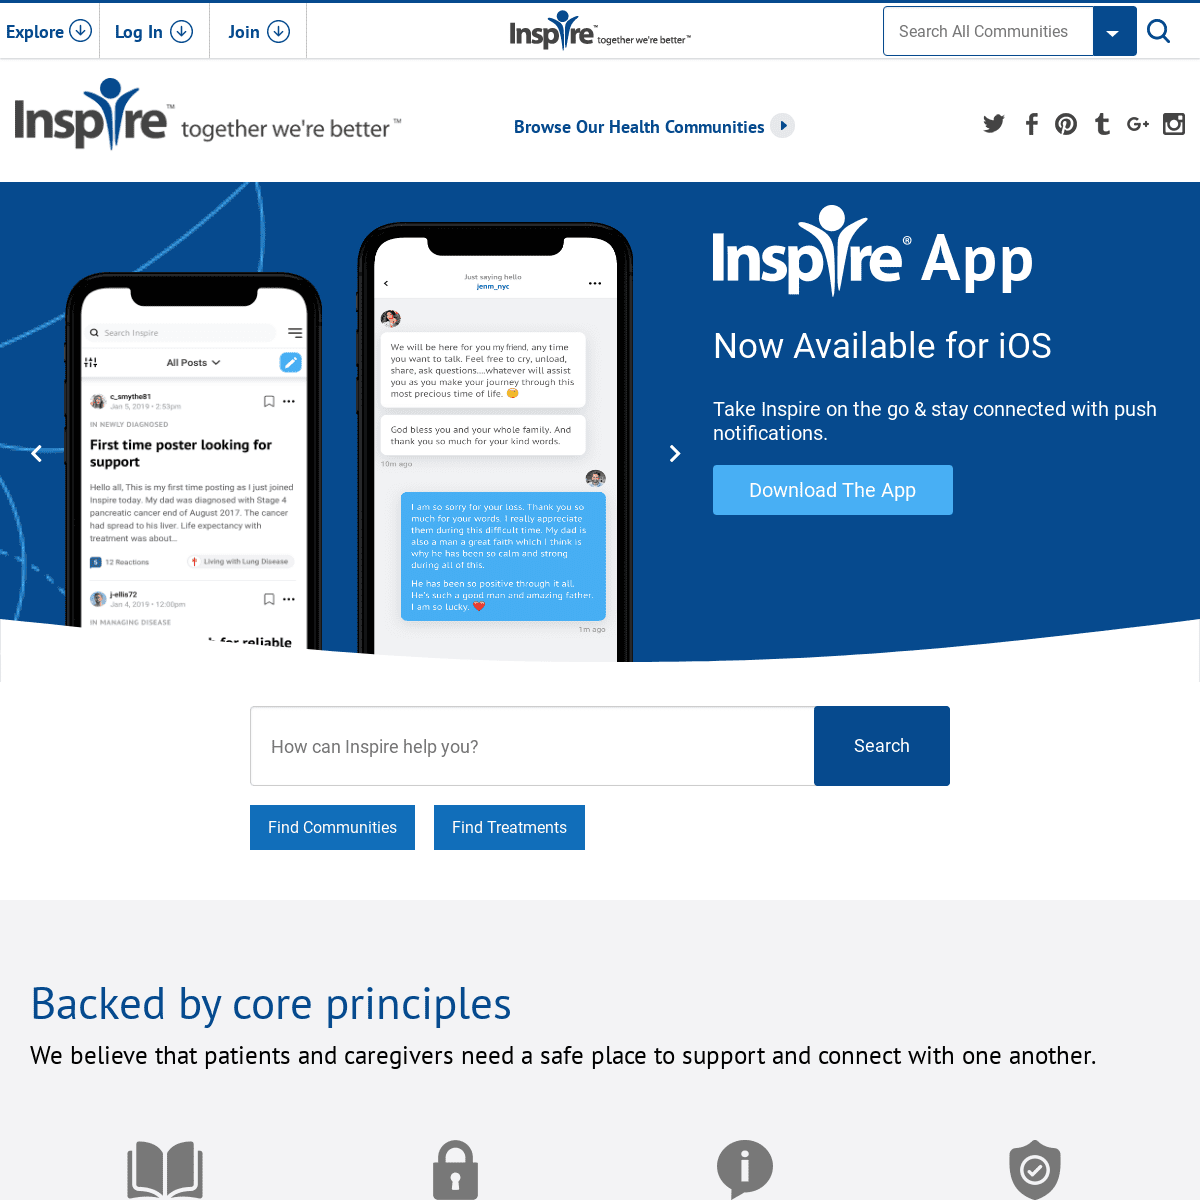 A complete backup of inspire.com